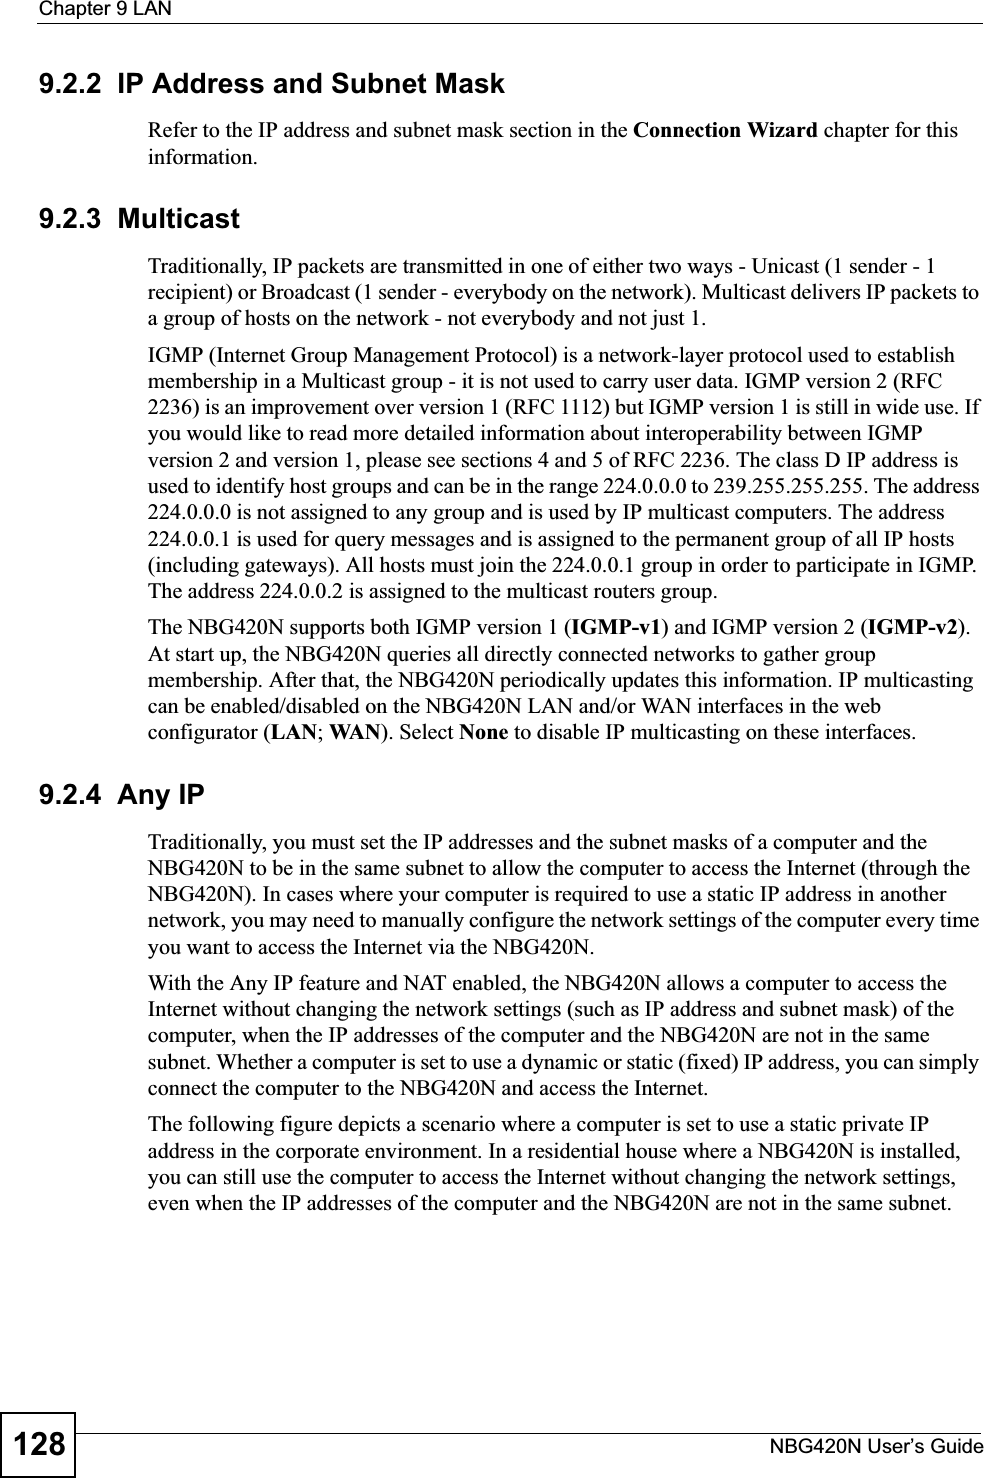 Chapter 9 LANNBG420N User’s Guide1289.2.2  IP Address and Subnet MaskRefer to the IP address and subnet mask section in the Connection Wizard chapter for this information.9.2.3  MulticastTraditionally, IP packets are transmitted in one of either two ways - Unicast (1 sender - 1 recipient) or Broadcast (1 sender - everybody on the network). Multicast delivers IP packets to a group of hosts on the network - not everybody and not just 1. IGMP (Internet Group Management Protocol) is a network-layer protocol used to establish membership in a Multicast group - it is not used to carry user data. IGMP version 2 (RFC 2236) is an improvement over version 1 (RFC 1112) but IGMP version 1 is still in wide use. If you would like to read more detailed information about interoperability between IGMP version 2 and version 1, please see sections 4 and 5 of RFC 2236. The class D IP address is used to identify host groups and can be in the range 224.0.0.0 to 239.255.255.255. The address 224.0.0.0 is not assigned to any group and is used by IP multicast computers. The address 224.0.0.1 is used for query messages and is assigned to the permanent group of all IP hosts (including gateways). All hosts must join the 224.0.0.1 group in order to participate in IGMP. The address 224.0.0.2 is assigned to the multicast routers group. The NBG420N supports both IGMP version 1 (IGMP-v1) and IGMP version 2 (IGMP-v2).At start up, the NBG420N queries all directly connected networks to gather group membership. After that, the NBG420N periodically updates this information. IP multicasting can be enabled/disabled on the NBG420N LAN and/or WAN interfaces in the web configurator (LAN; WAN). Select None to disable IP multicasting on these interfaces.9.2.4  Any IPTraditionally, you must set the IP addresses and the subnet masks of a computer and the NBG420N to be in the same subnet to allow the computer to access the Internet (through the NBG420N). In cases where your computer is required to use a static IP address in another network, you may need to manually configure the network settings of the computer every time you want to access the Internet via the NBG420N.With the Any IP feature and NAT enabled, the NBG420N allows a computer to access the Internet without changing the network settings (such as IP address and subnet mask) of the computer, when the IP addresses of the computer and the NBG420N are not in the same subnet. Whether a computer is set to use a dynamic or static (fixed) IP address, you can simply connect the computer to the NBG420N and access the Internet.The following figure depicts a scenario where a computer is set to use a static private IP address in the corporate environment. In a residential house where a NBG420N is installed, you can still use the computer to access the Internet without changing the network settings, even when the IP addresses of the computer and the NBG420N are not in the same subnet. 